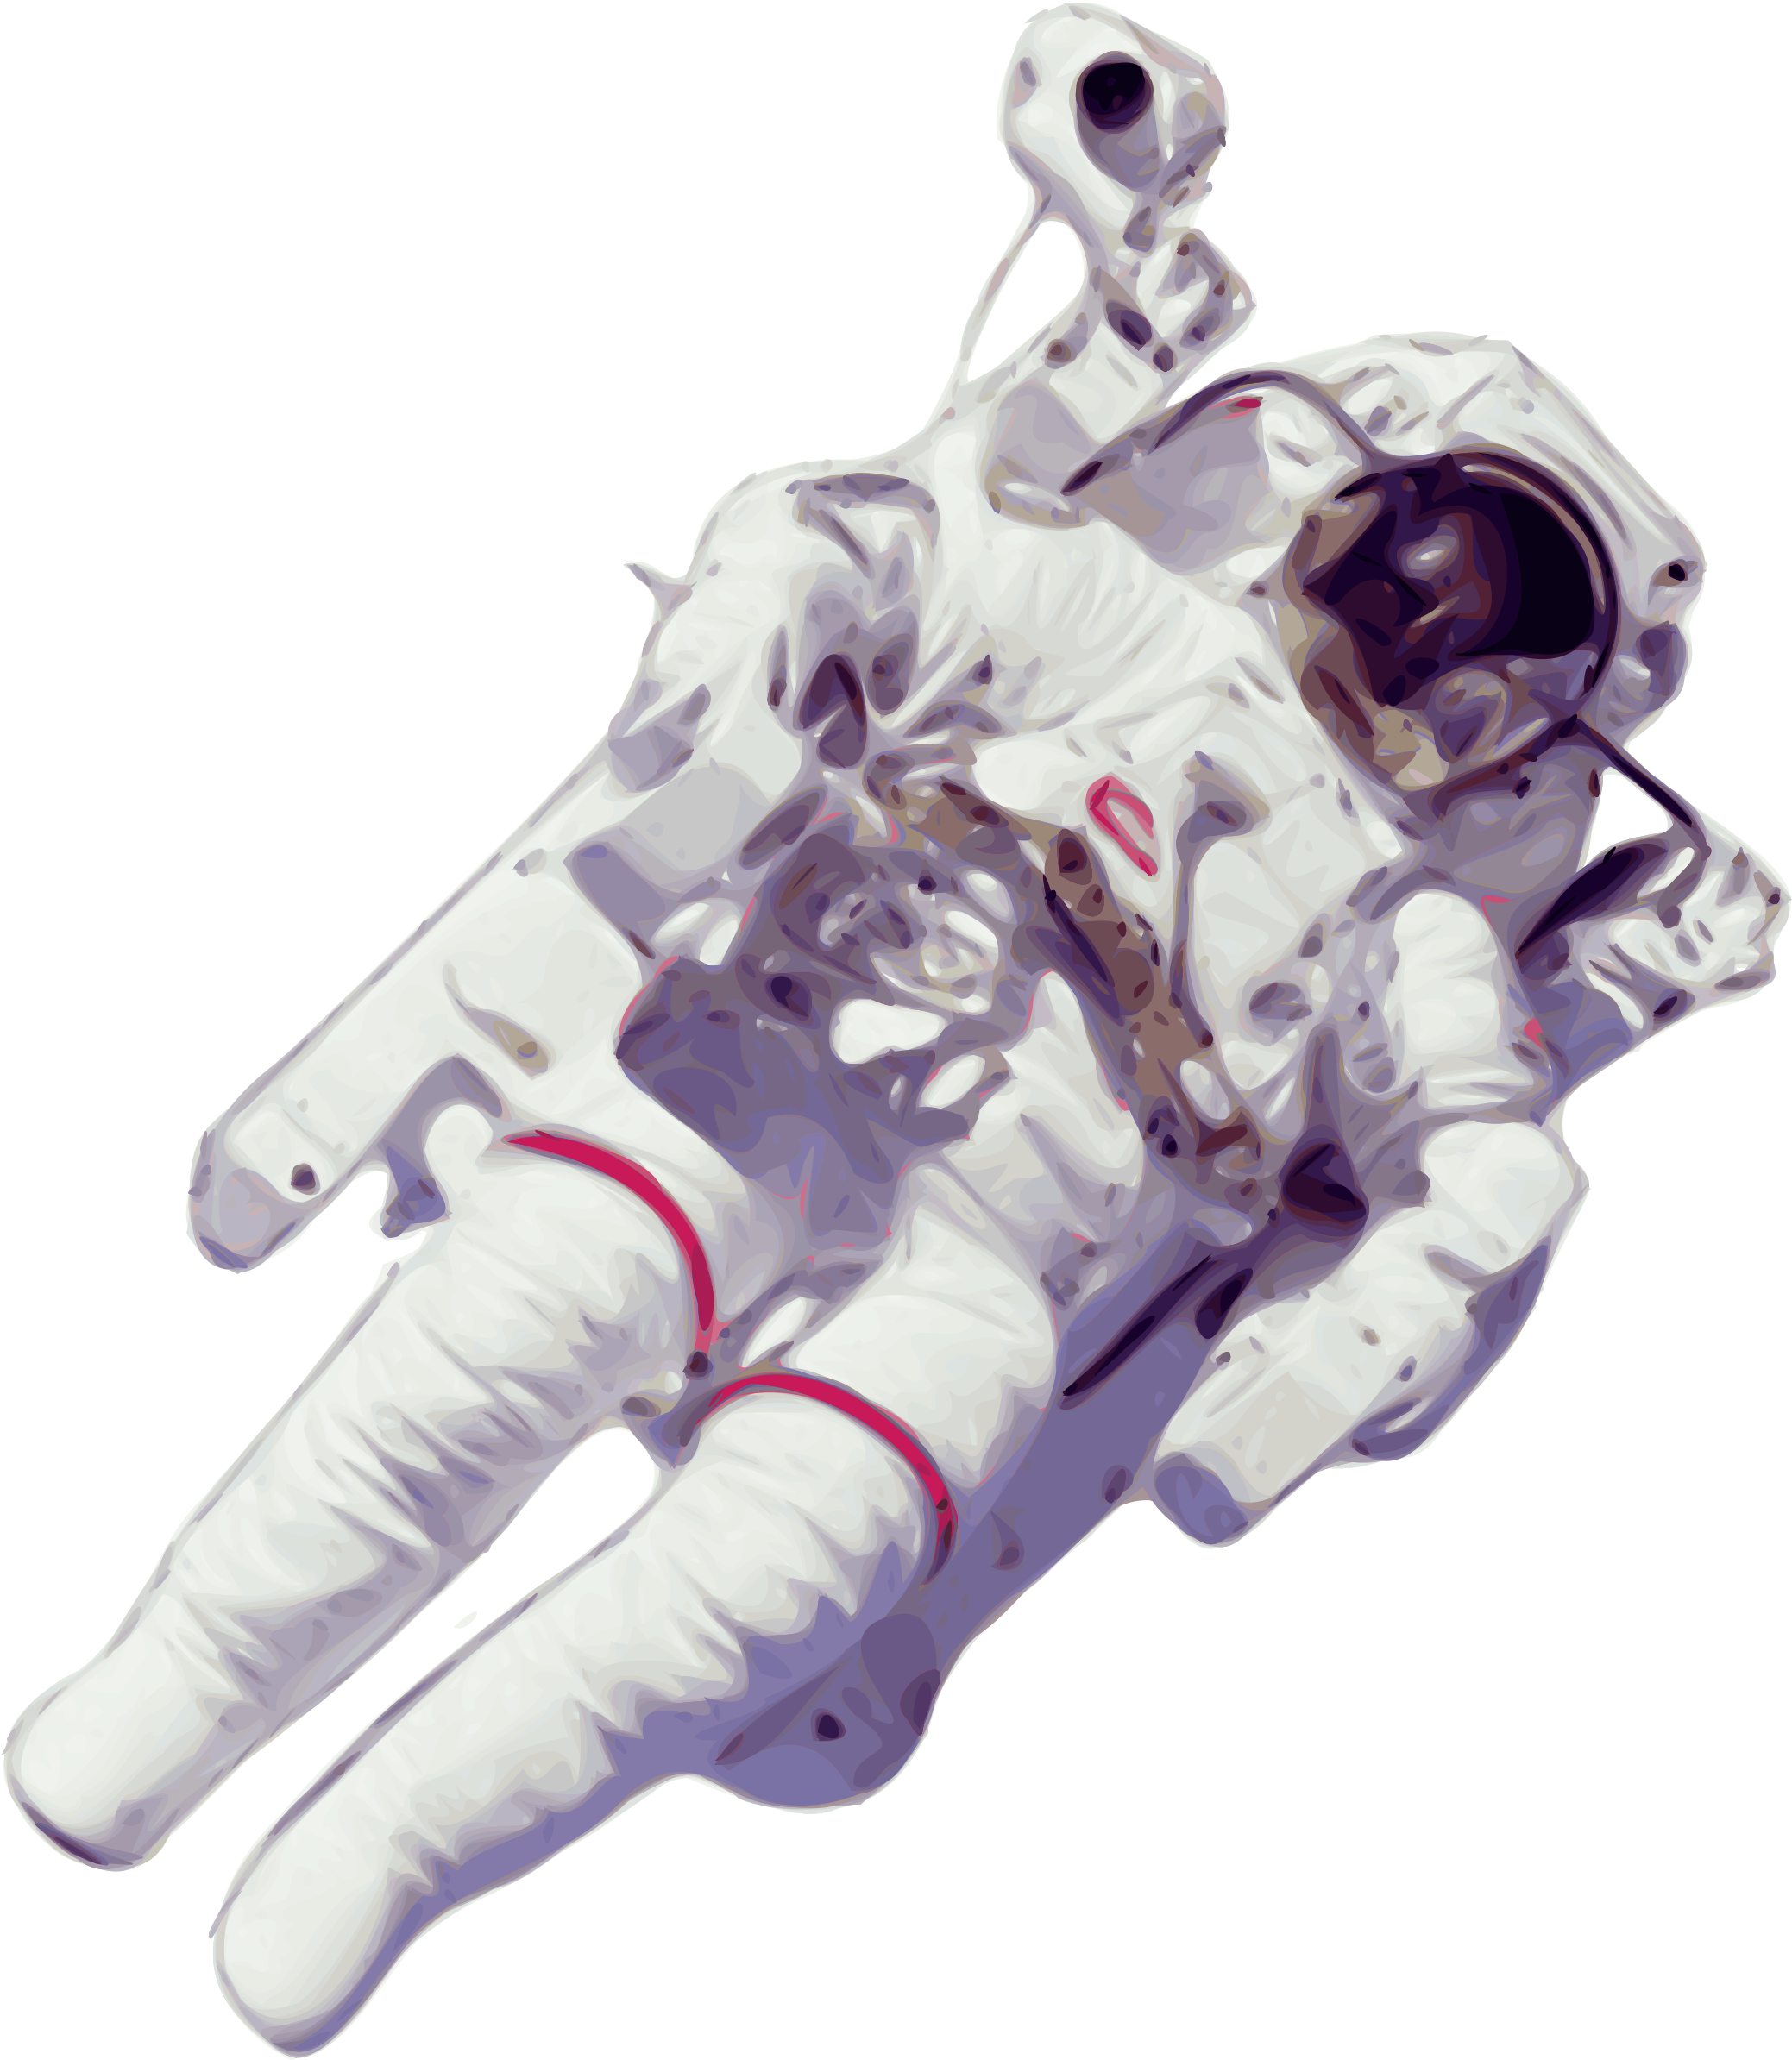 Astronaut PNG HD Image